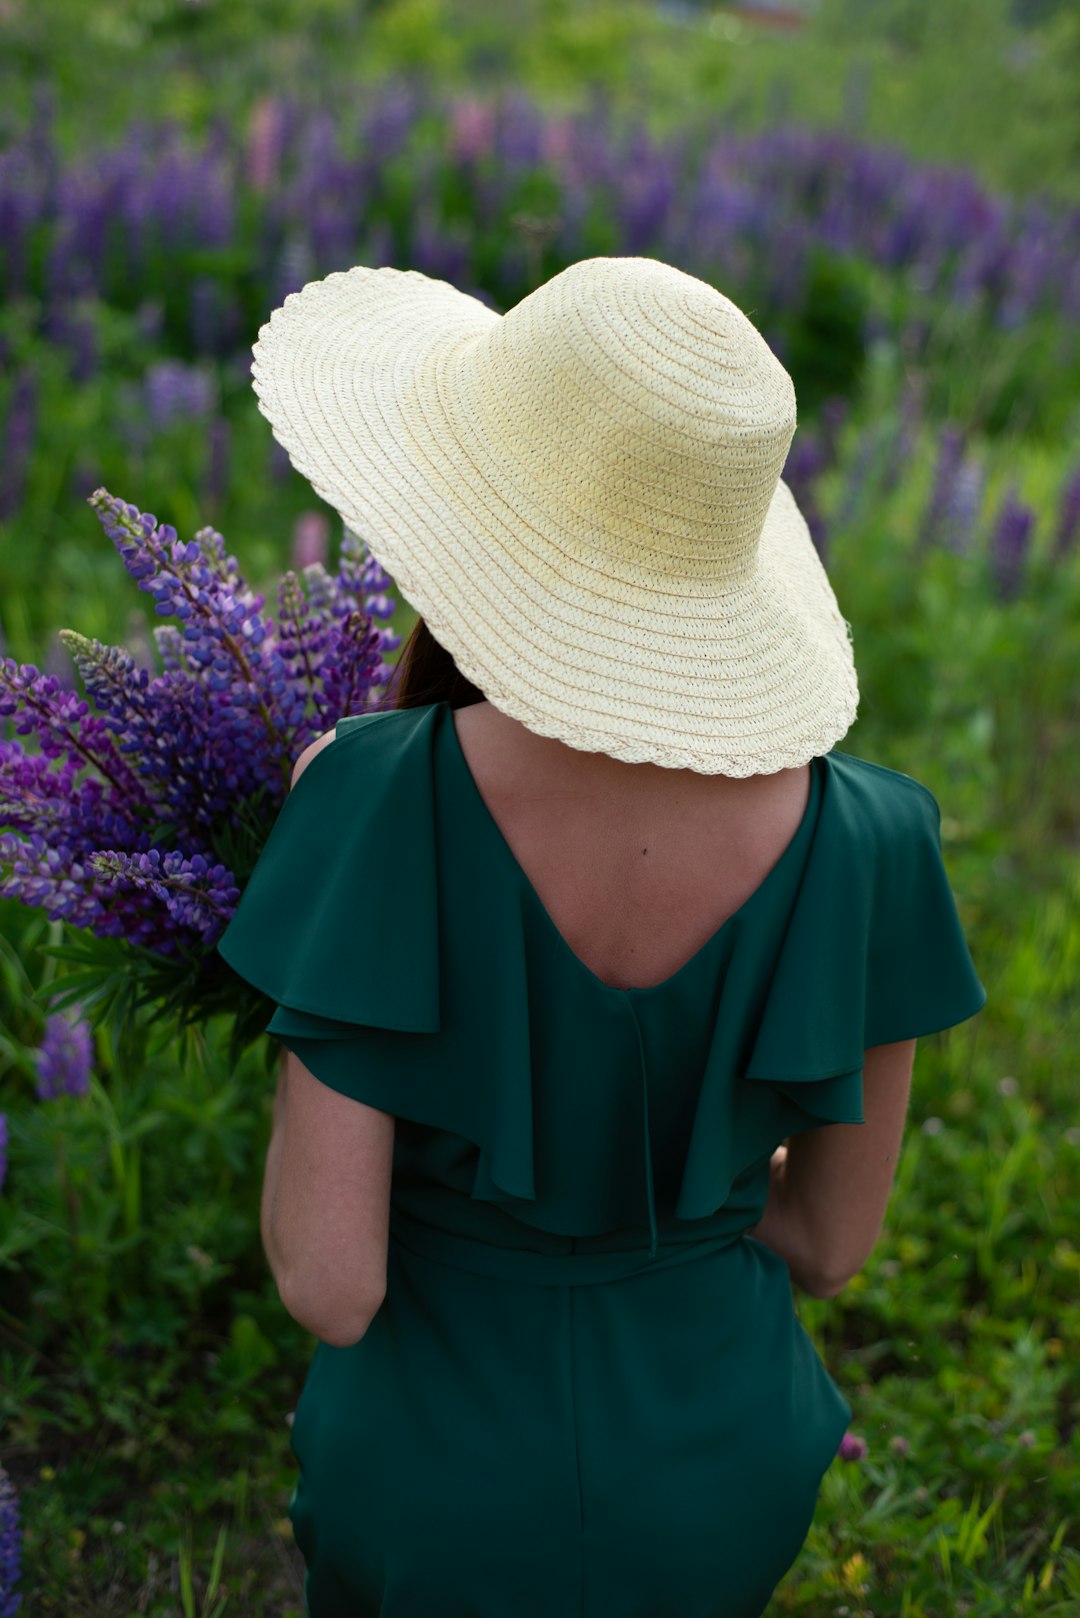 woman in blue dress wearing white knit hat standing on purple flower field during daytime